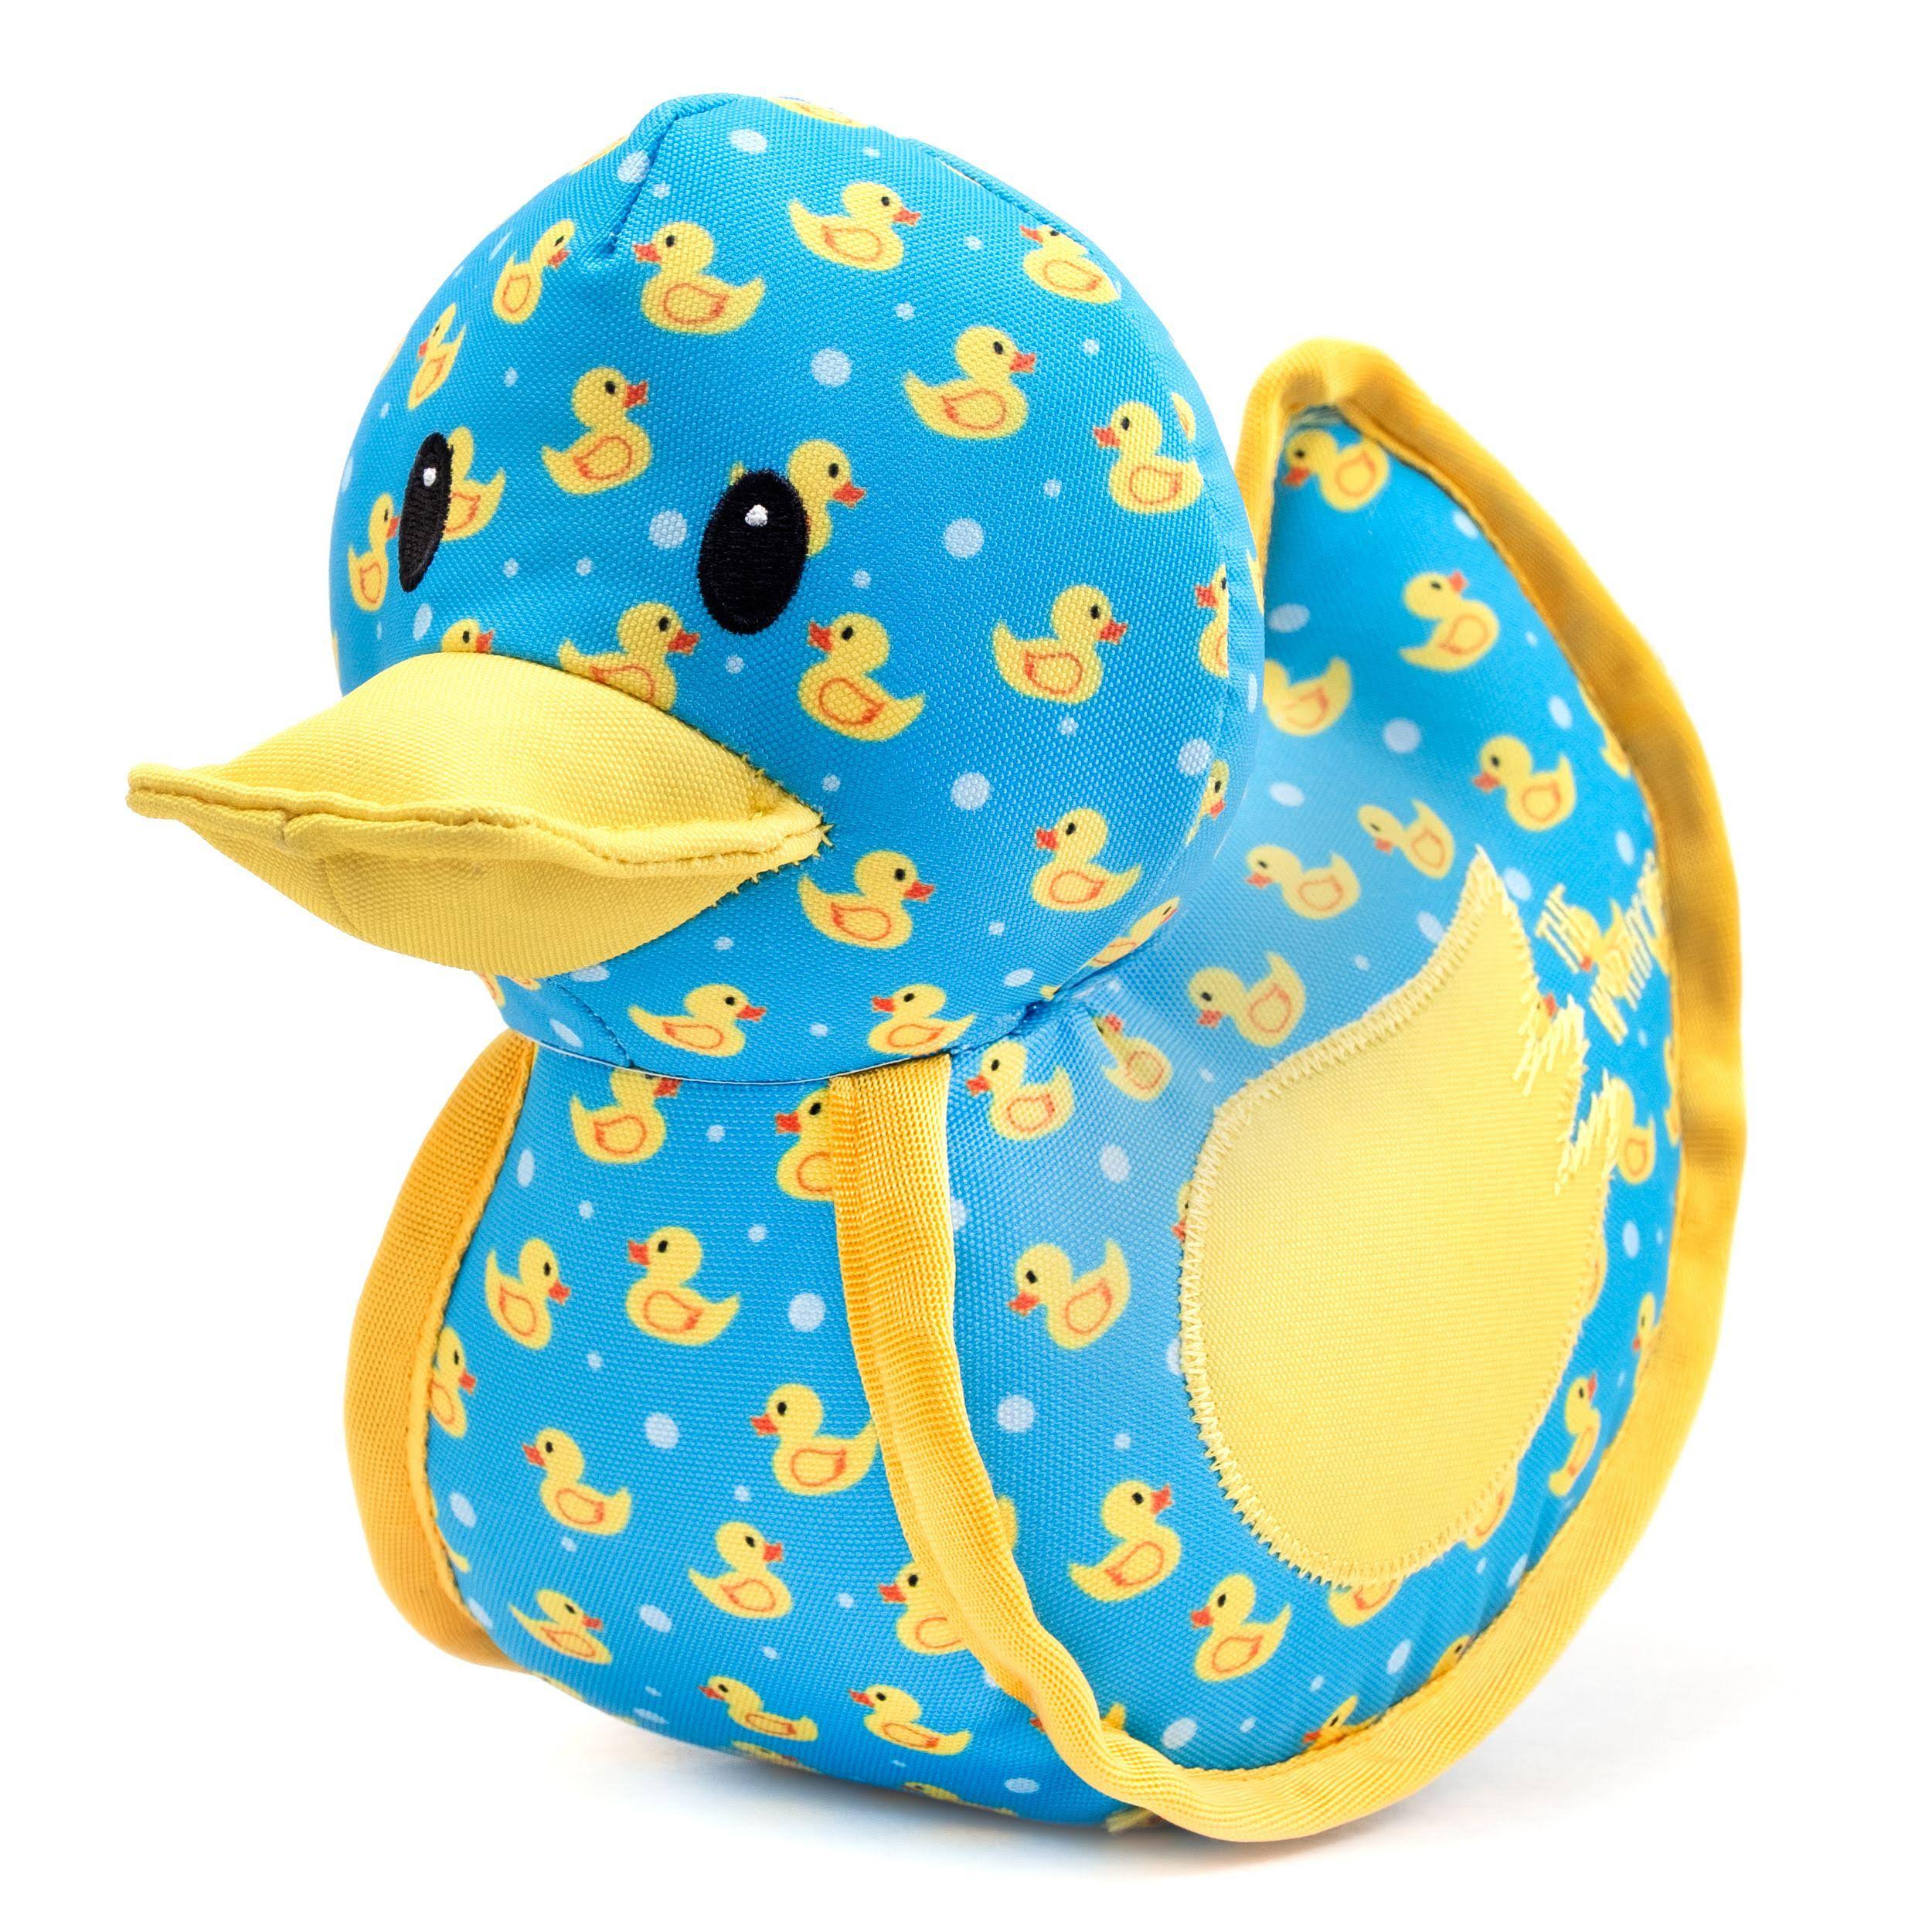 The Worthy Dog Rubber Duck Dog Toy, Small